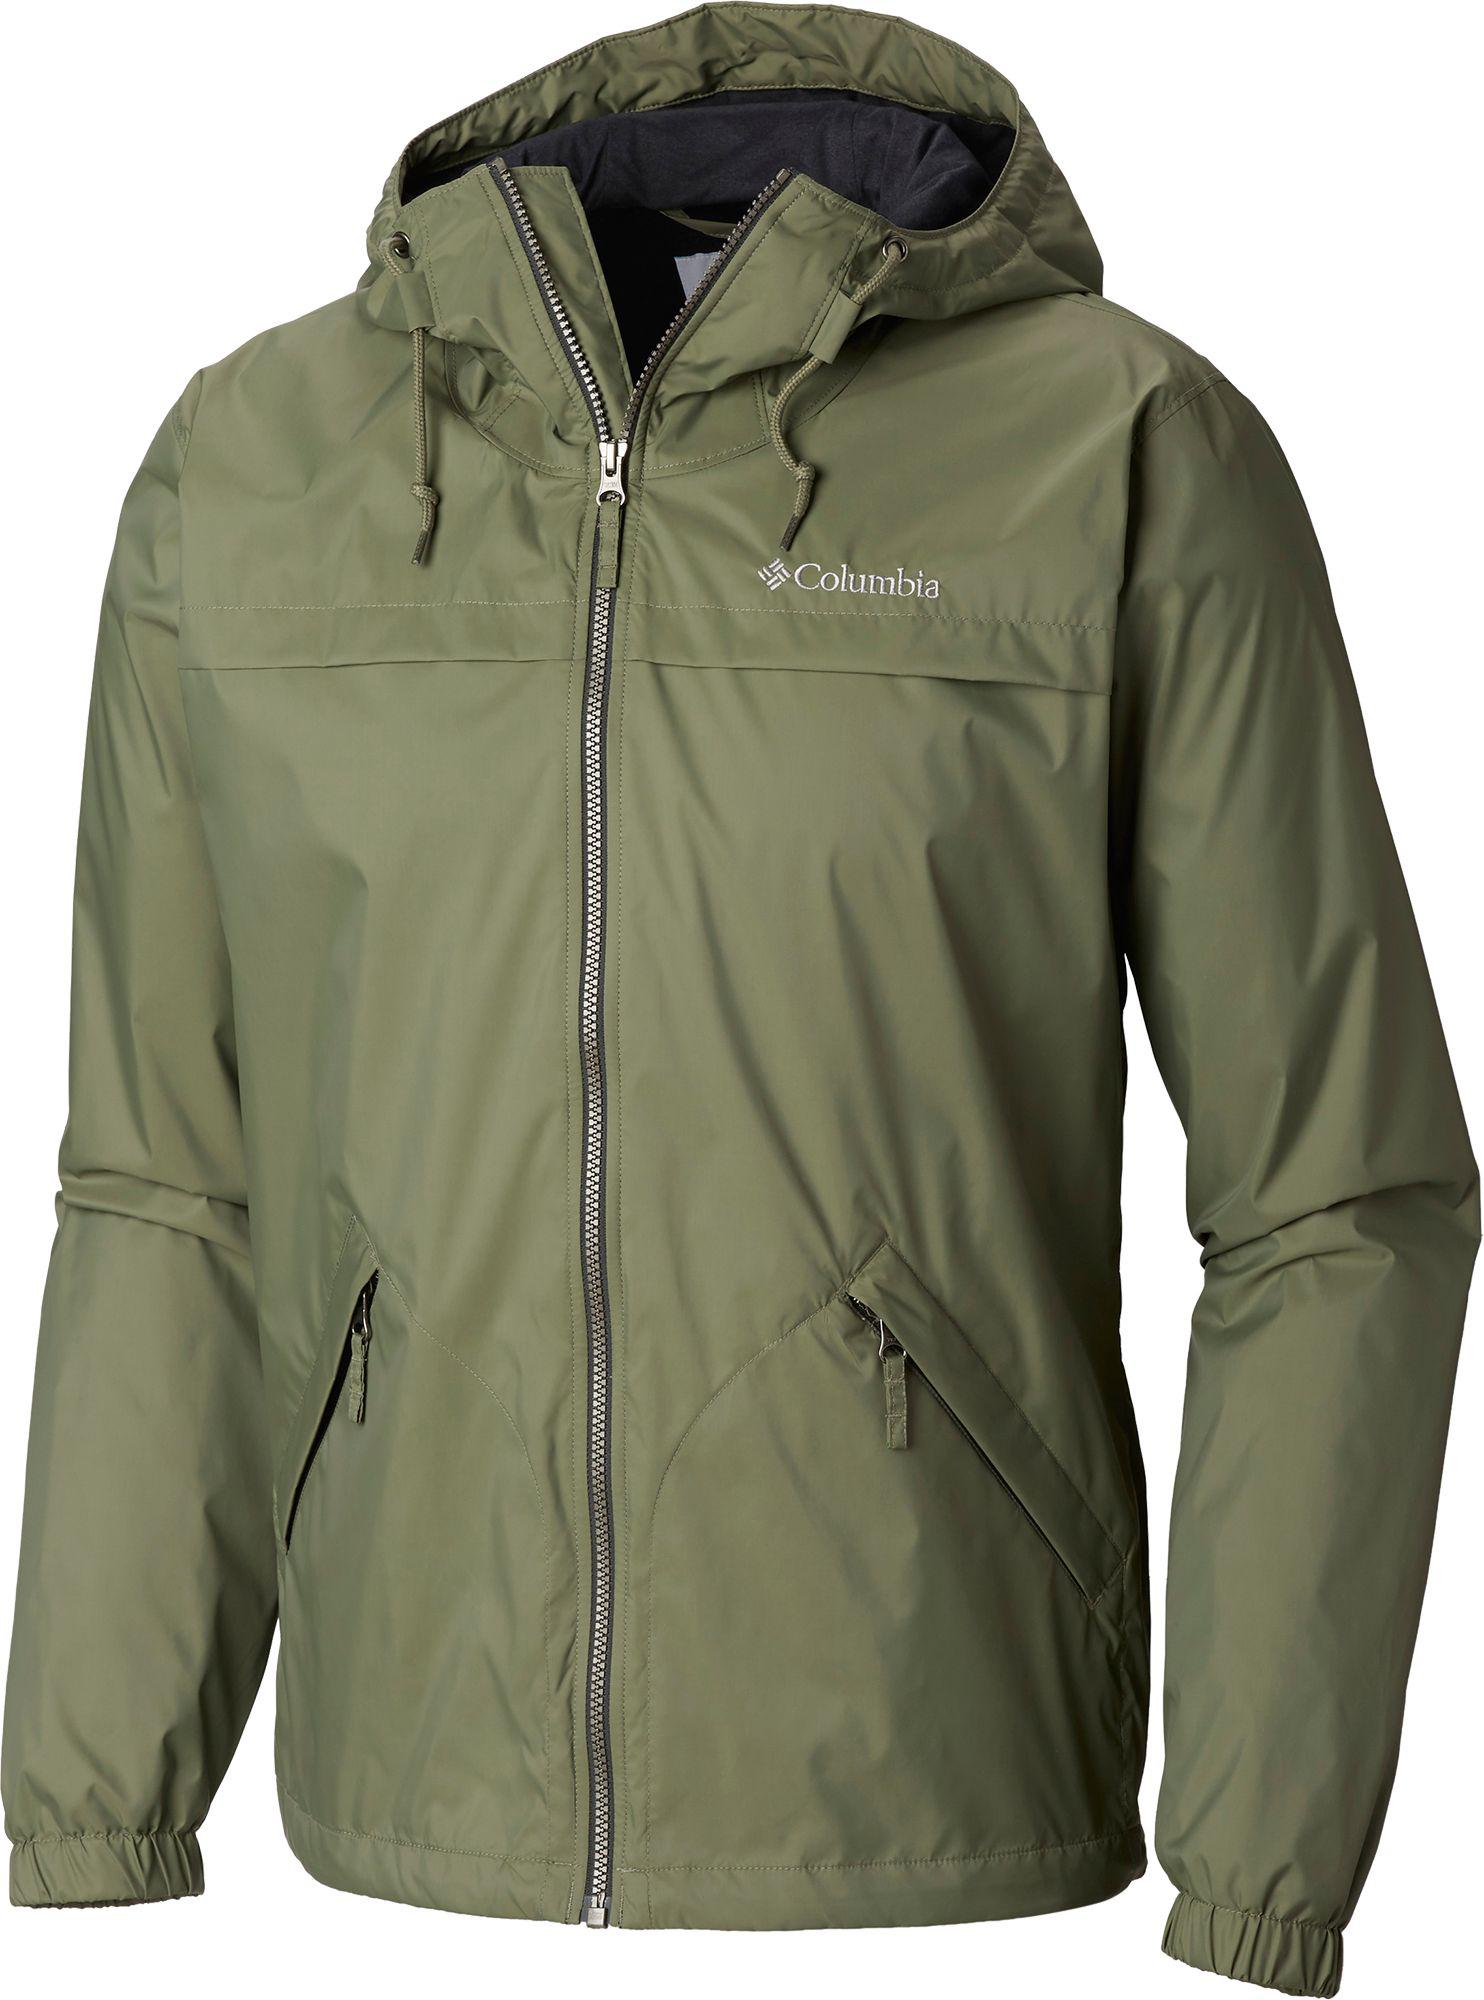 Columbia Synthetic Oroville Creek Lined Rain Jacket in Green for Men - Lyst